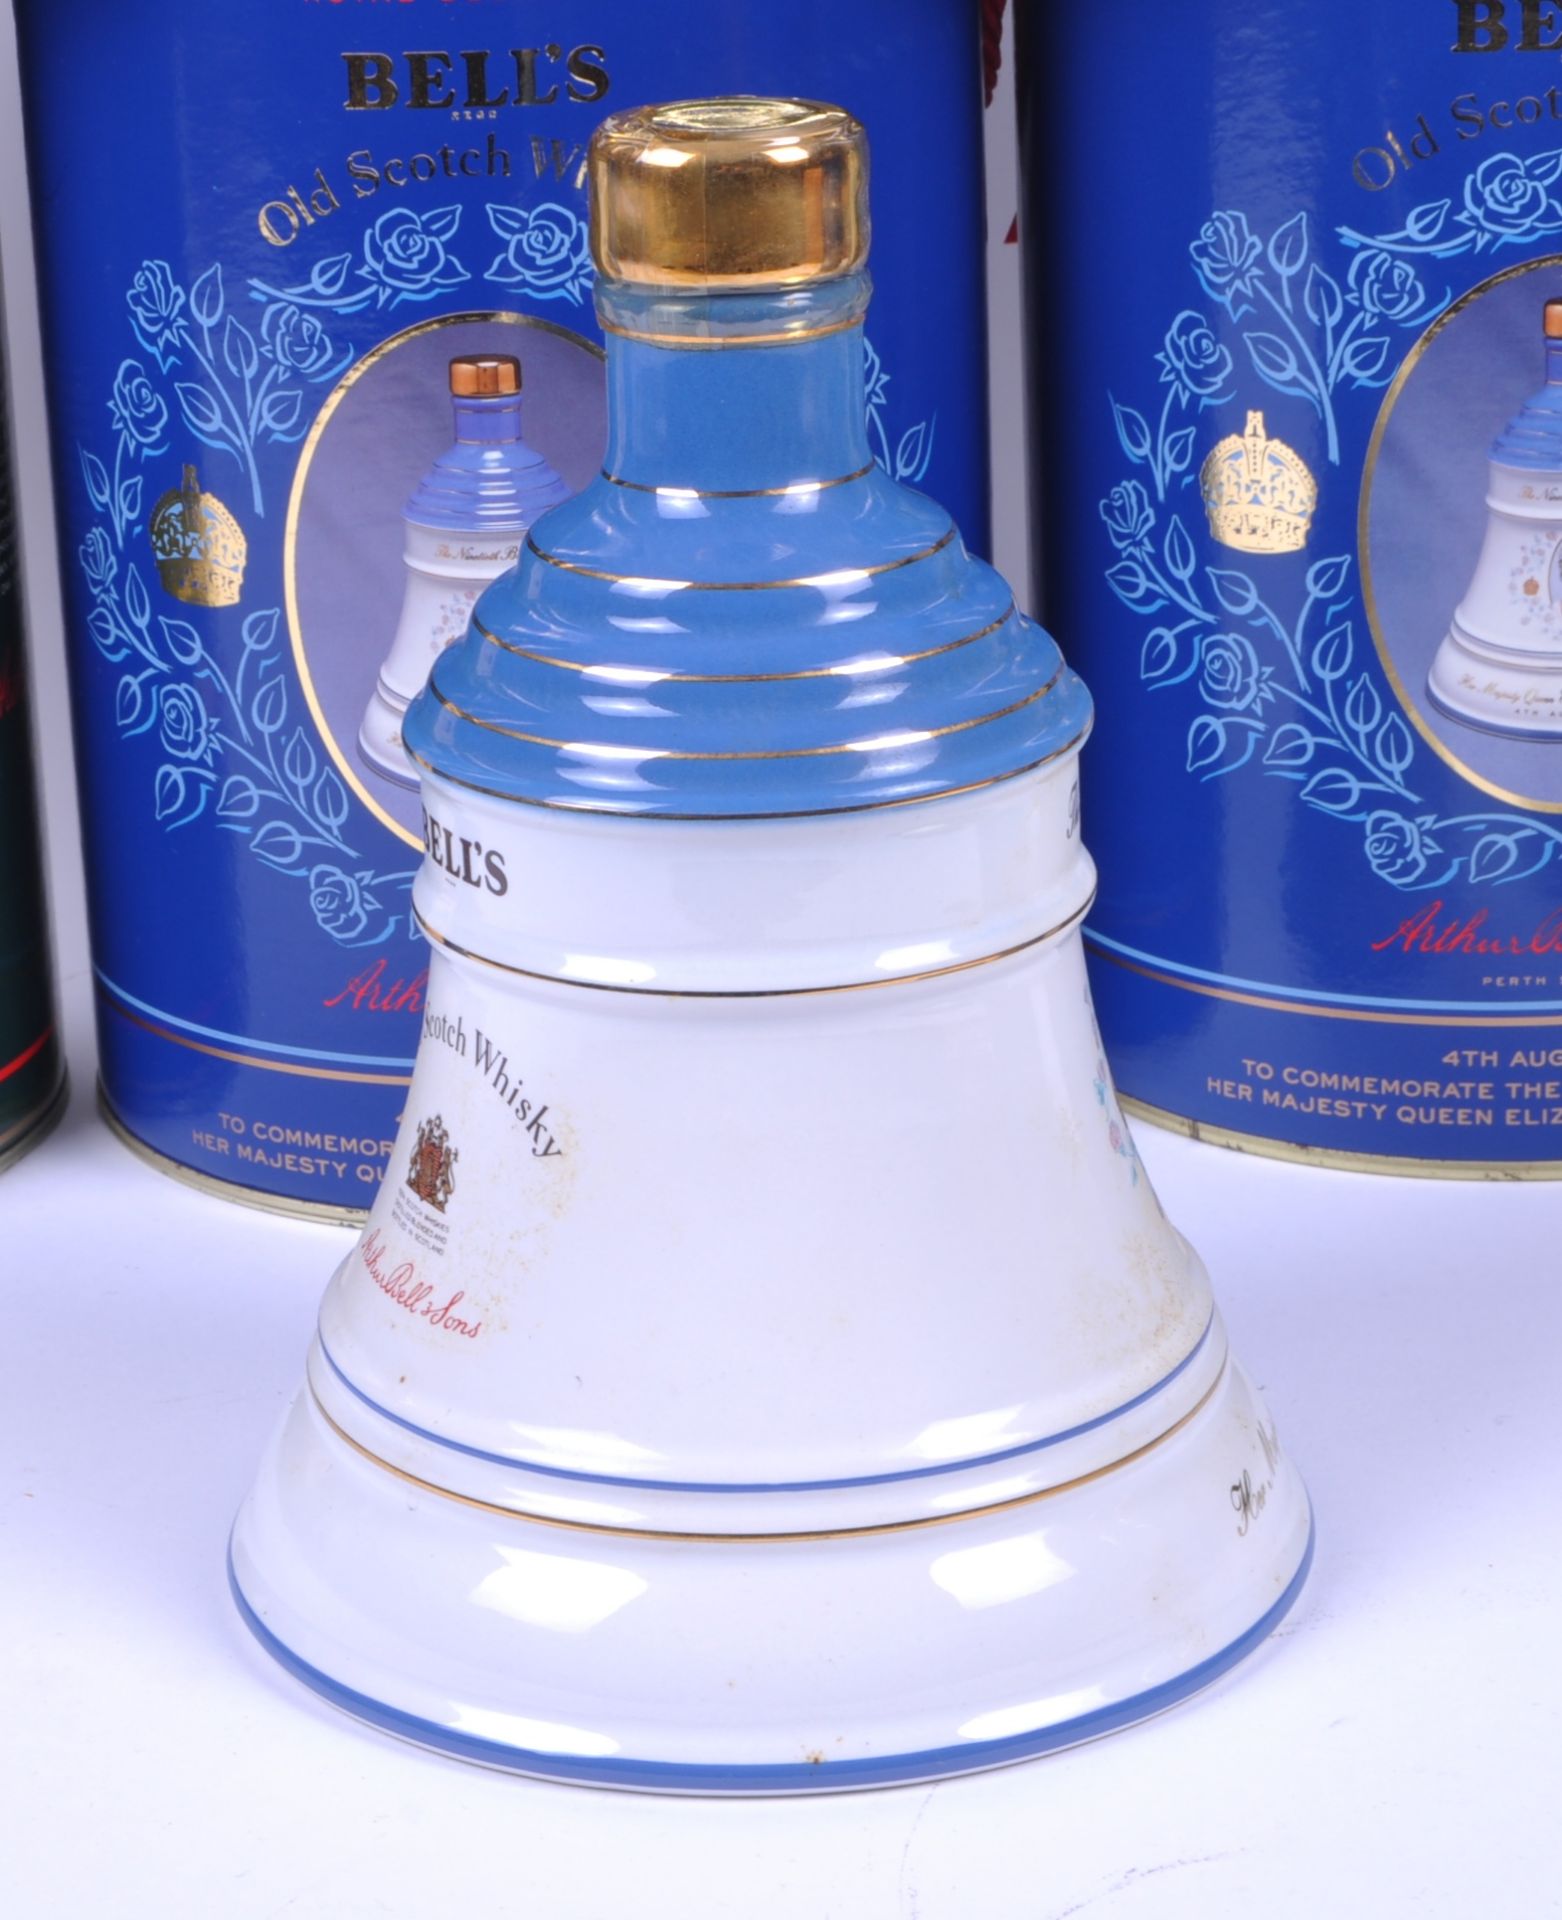 COLLECTION OF BELLS WHISKY DECANTERS - Image 6 of 14